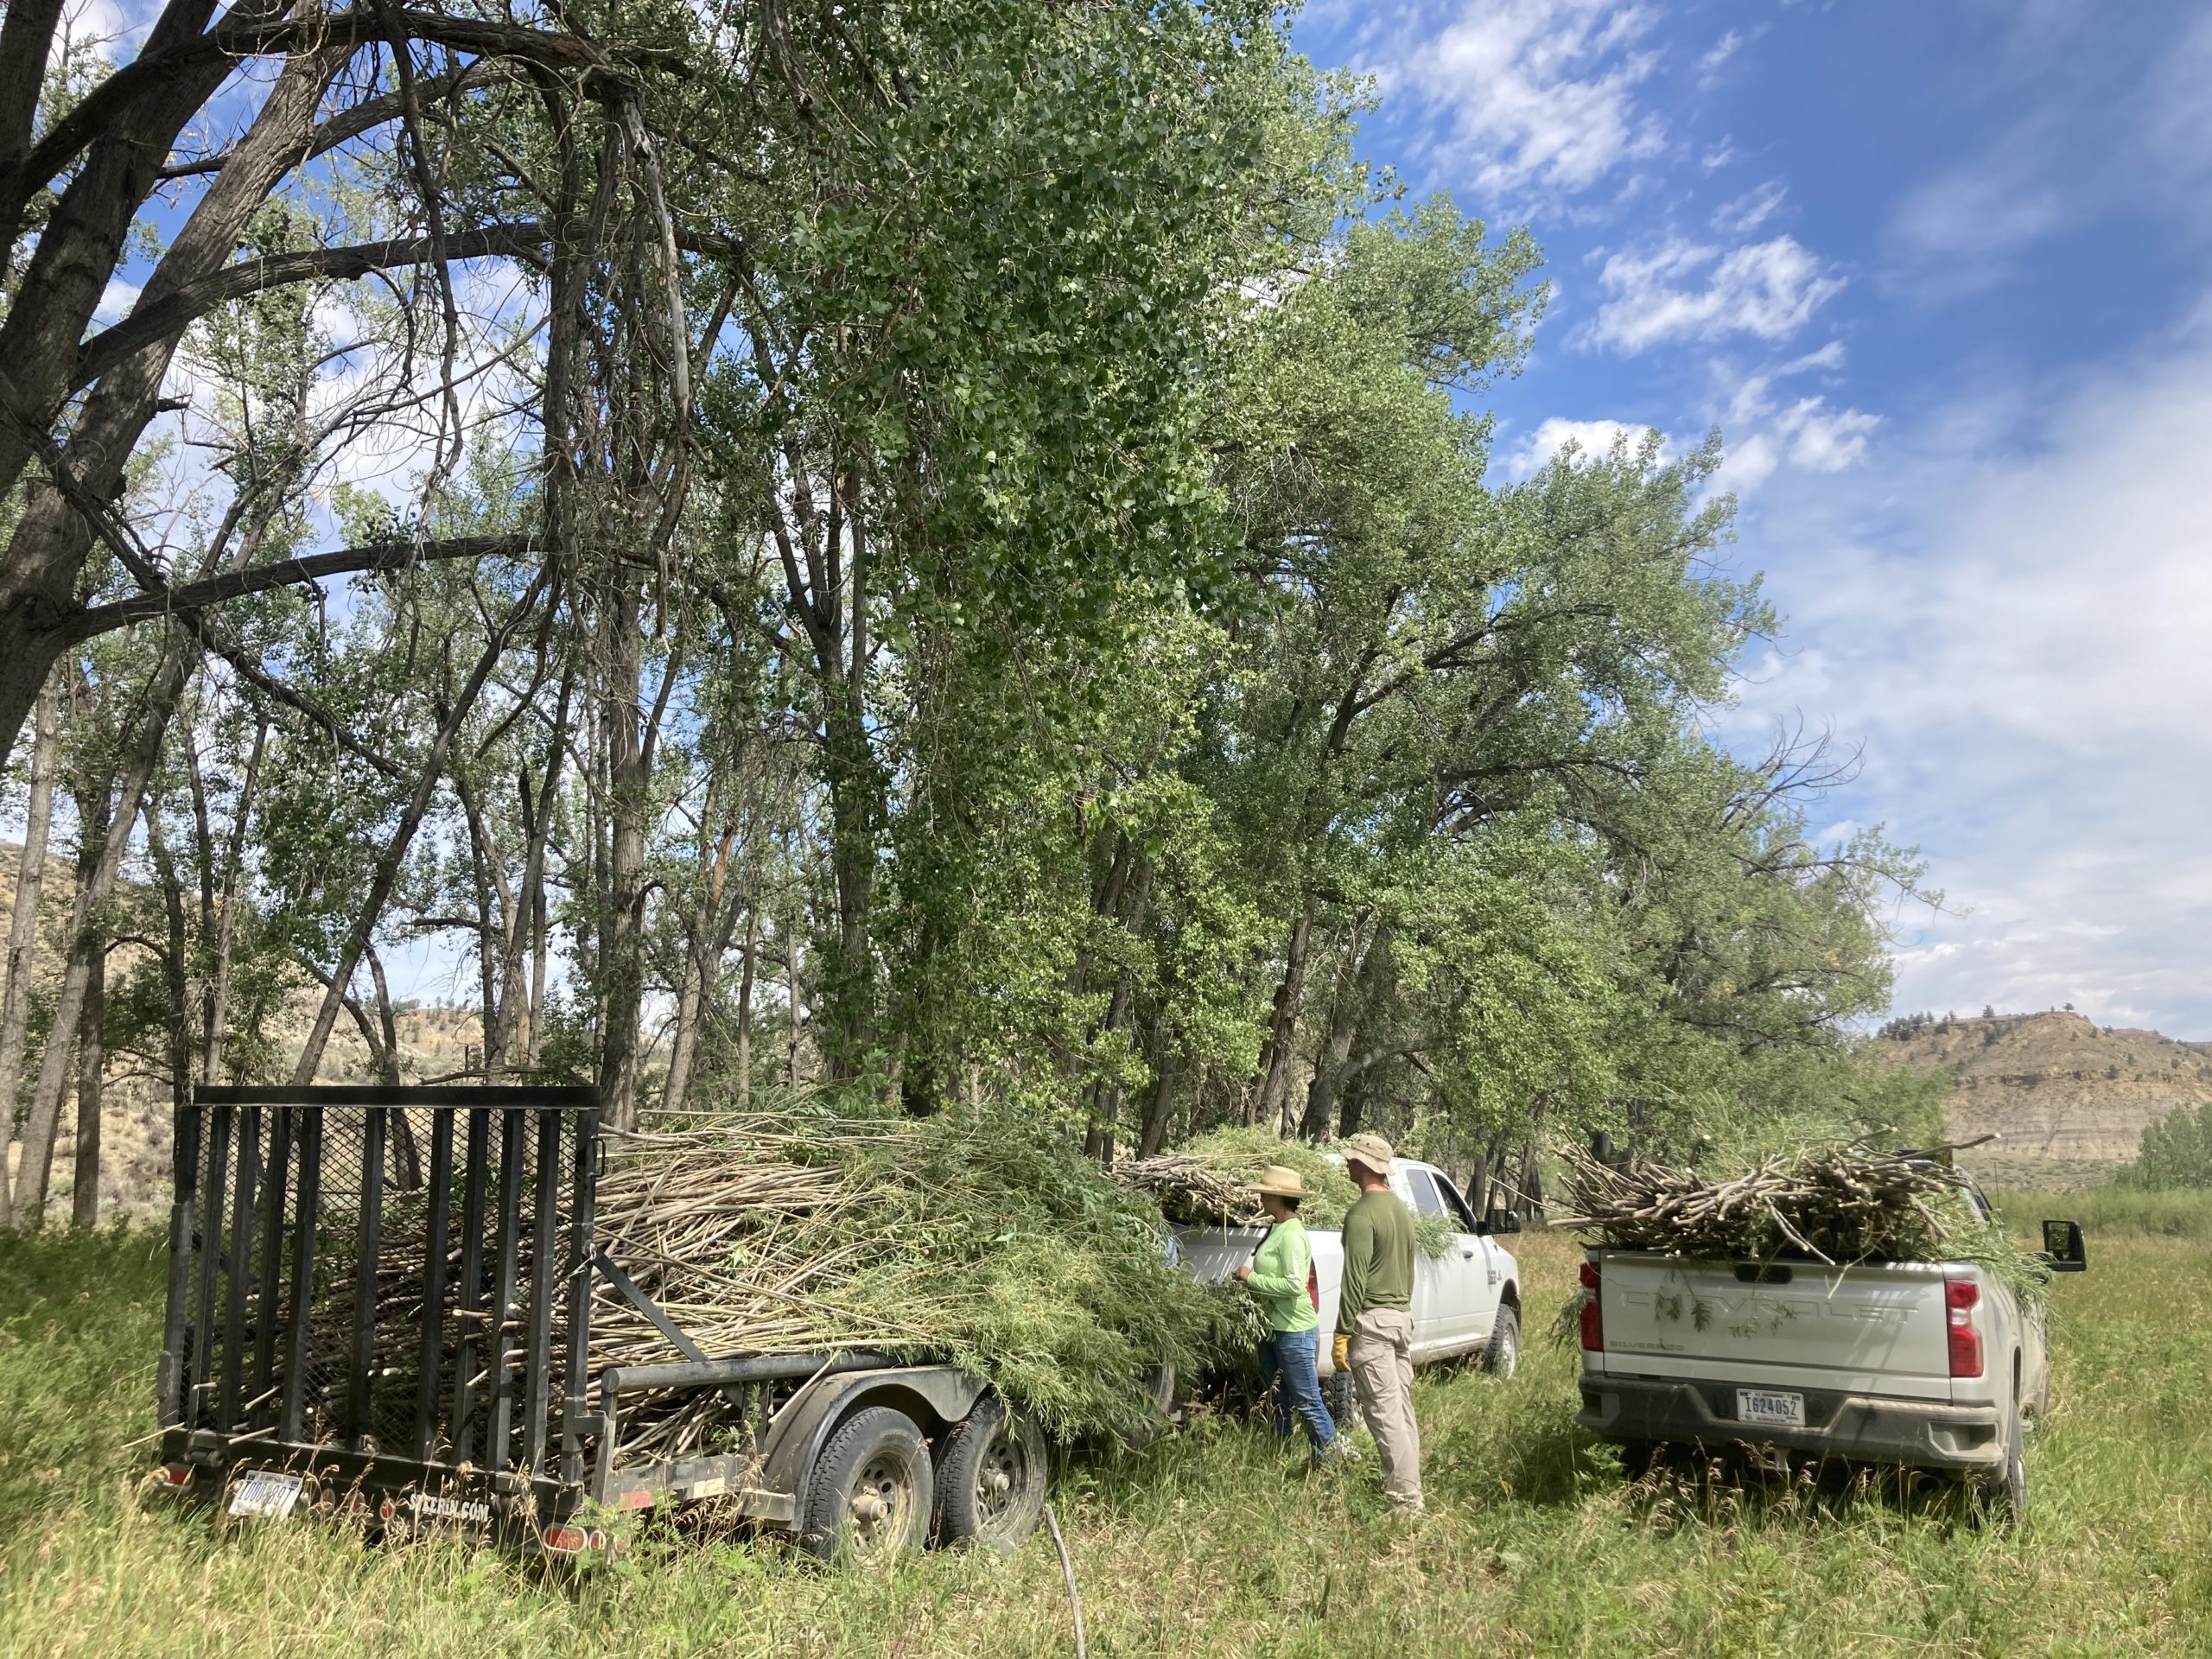 securing cut willows to truck